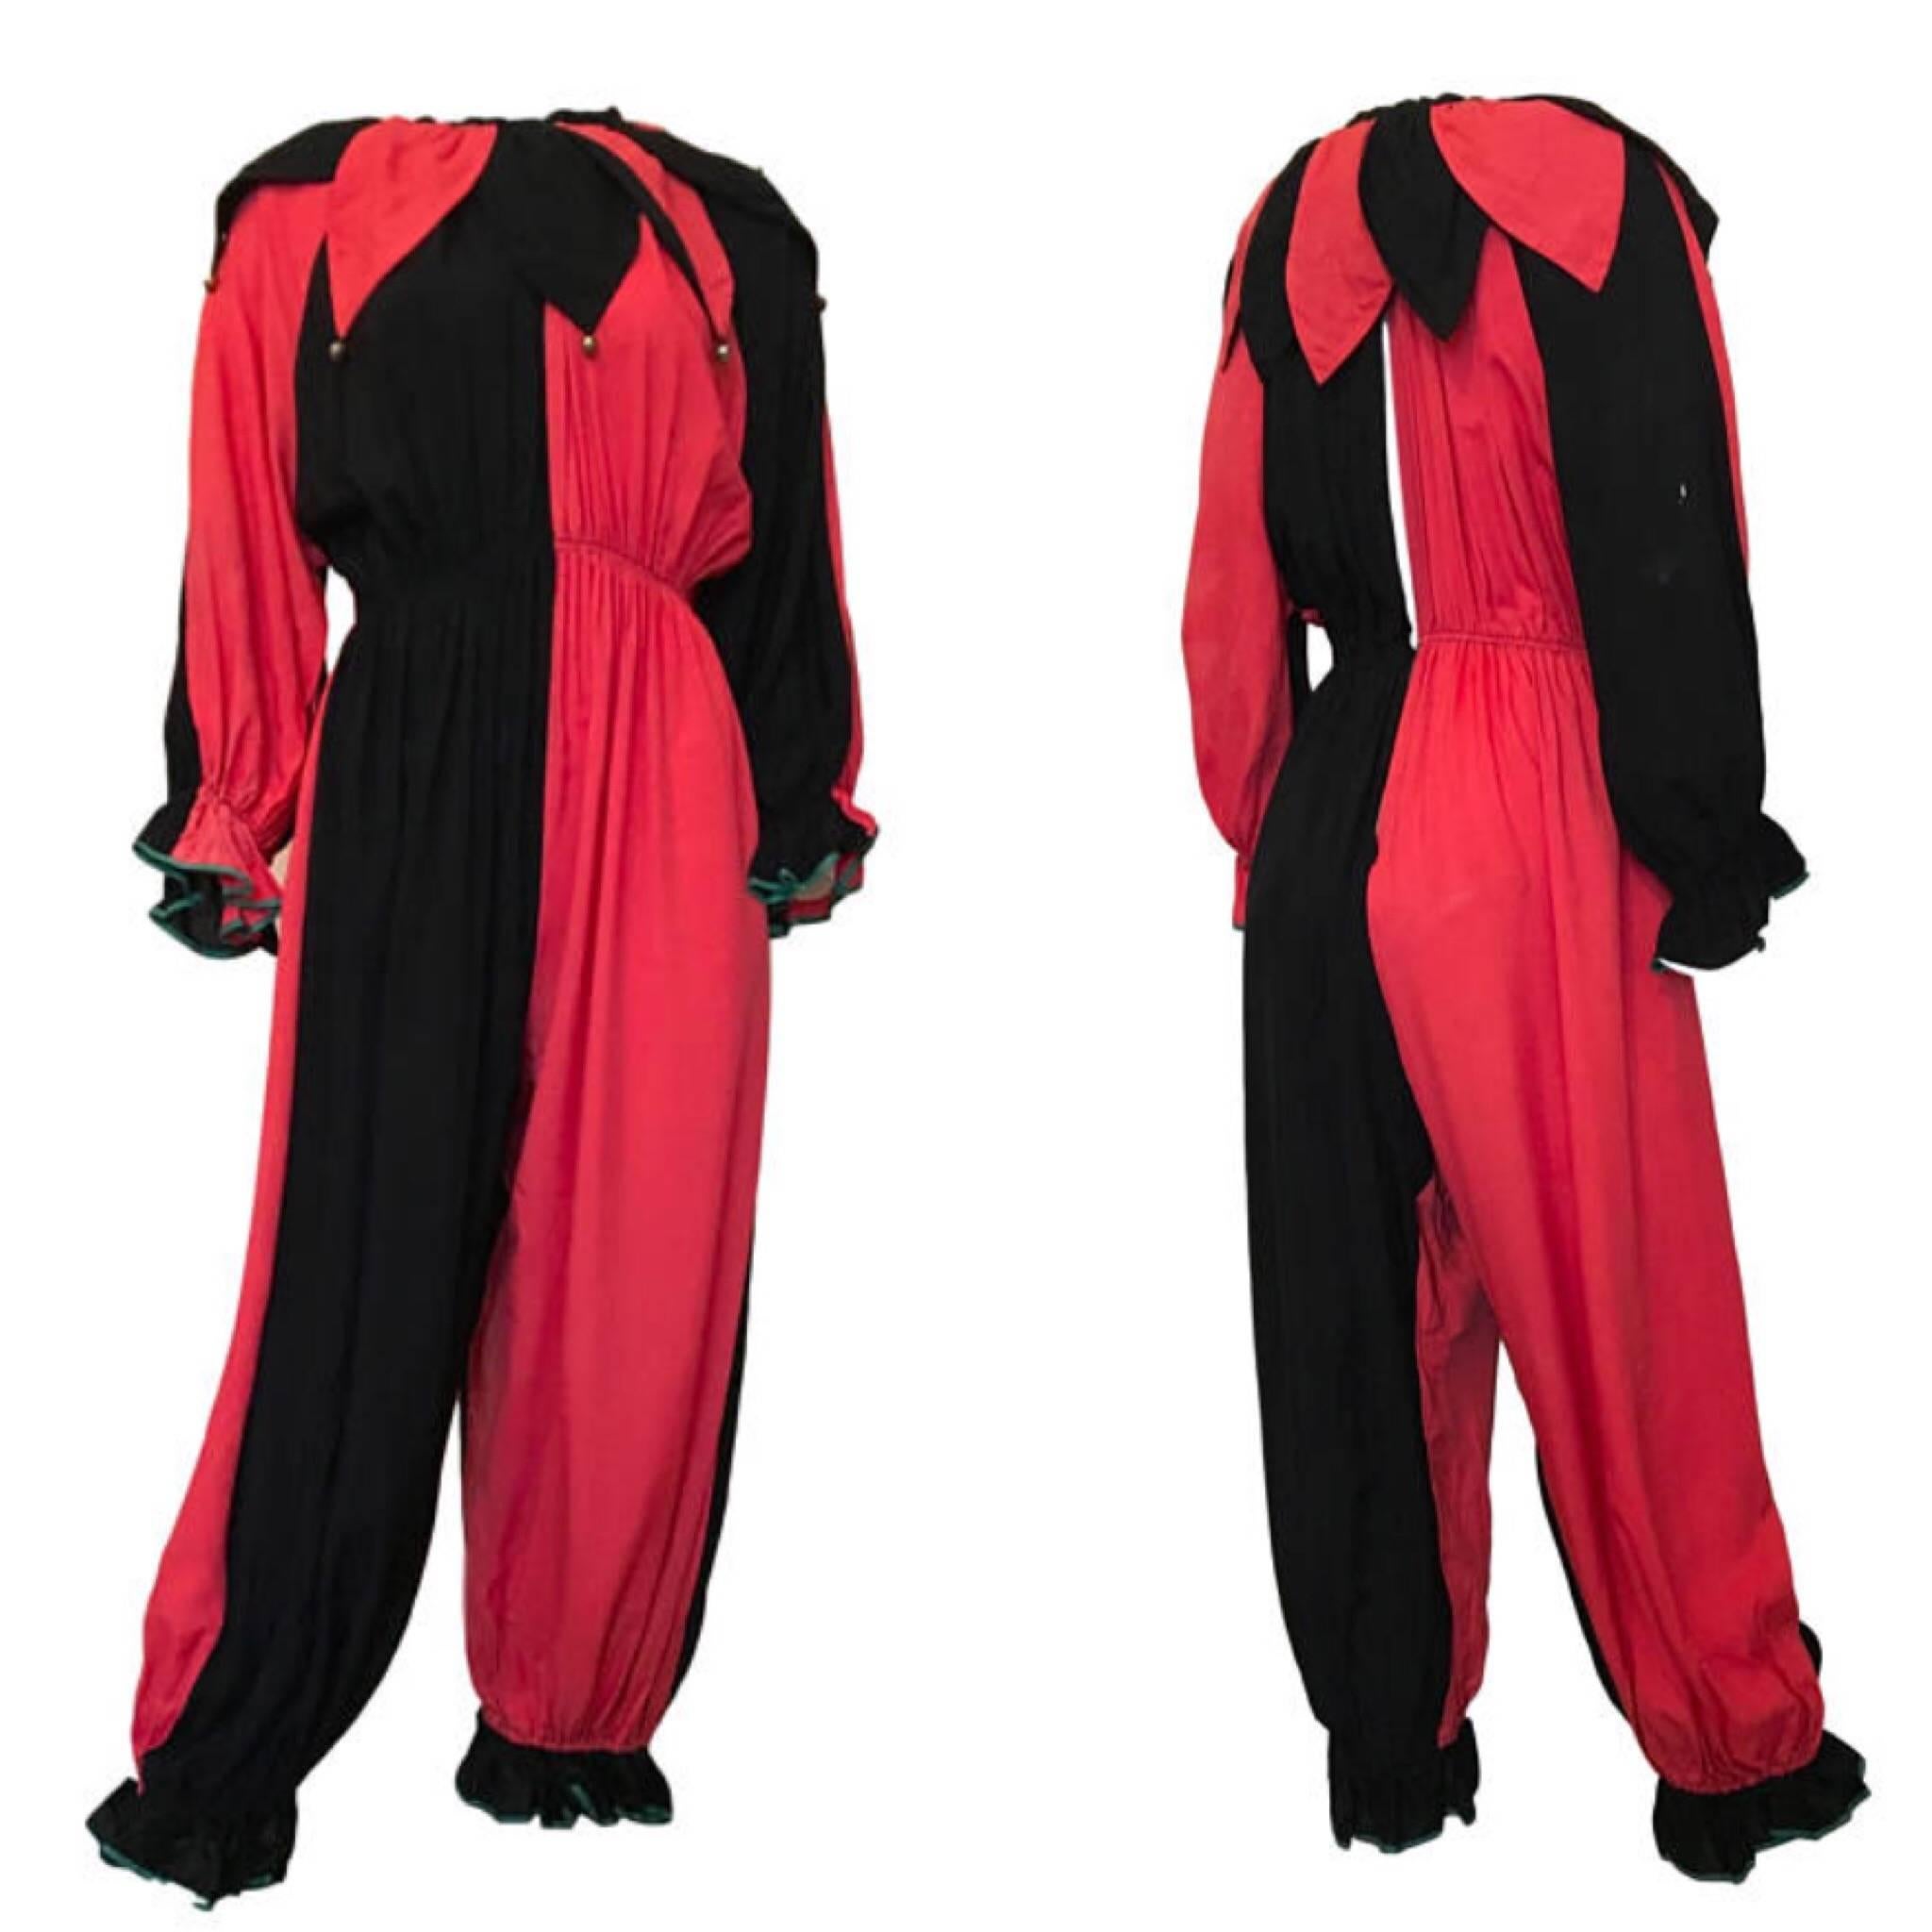 1920s vintage original harlequin costume/ Jumpsuit. With ballooned leg, gathered ankles and wrists with a green piping, open back feature, hook/eye fastening and separate neck piece with bells! Made from a silky rayon material.

Size UK 8/10.